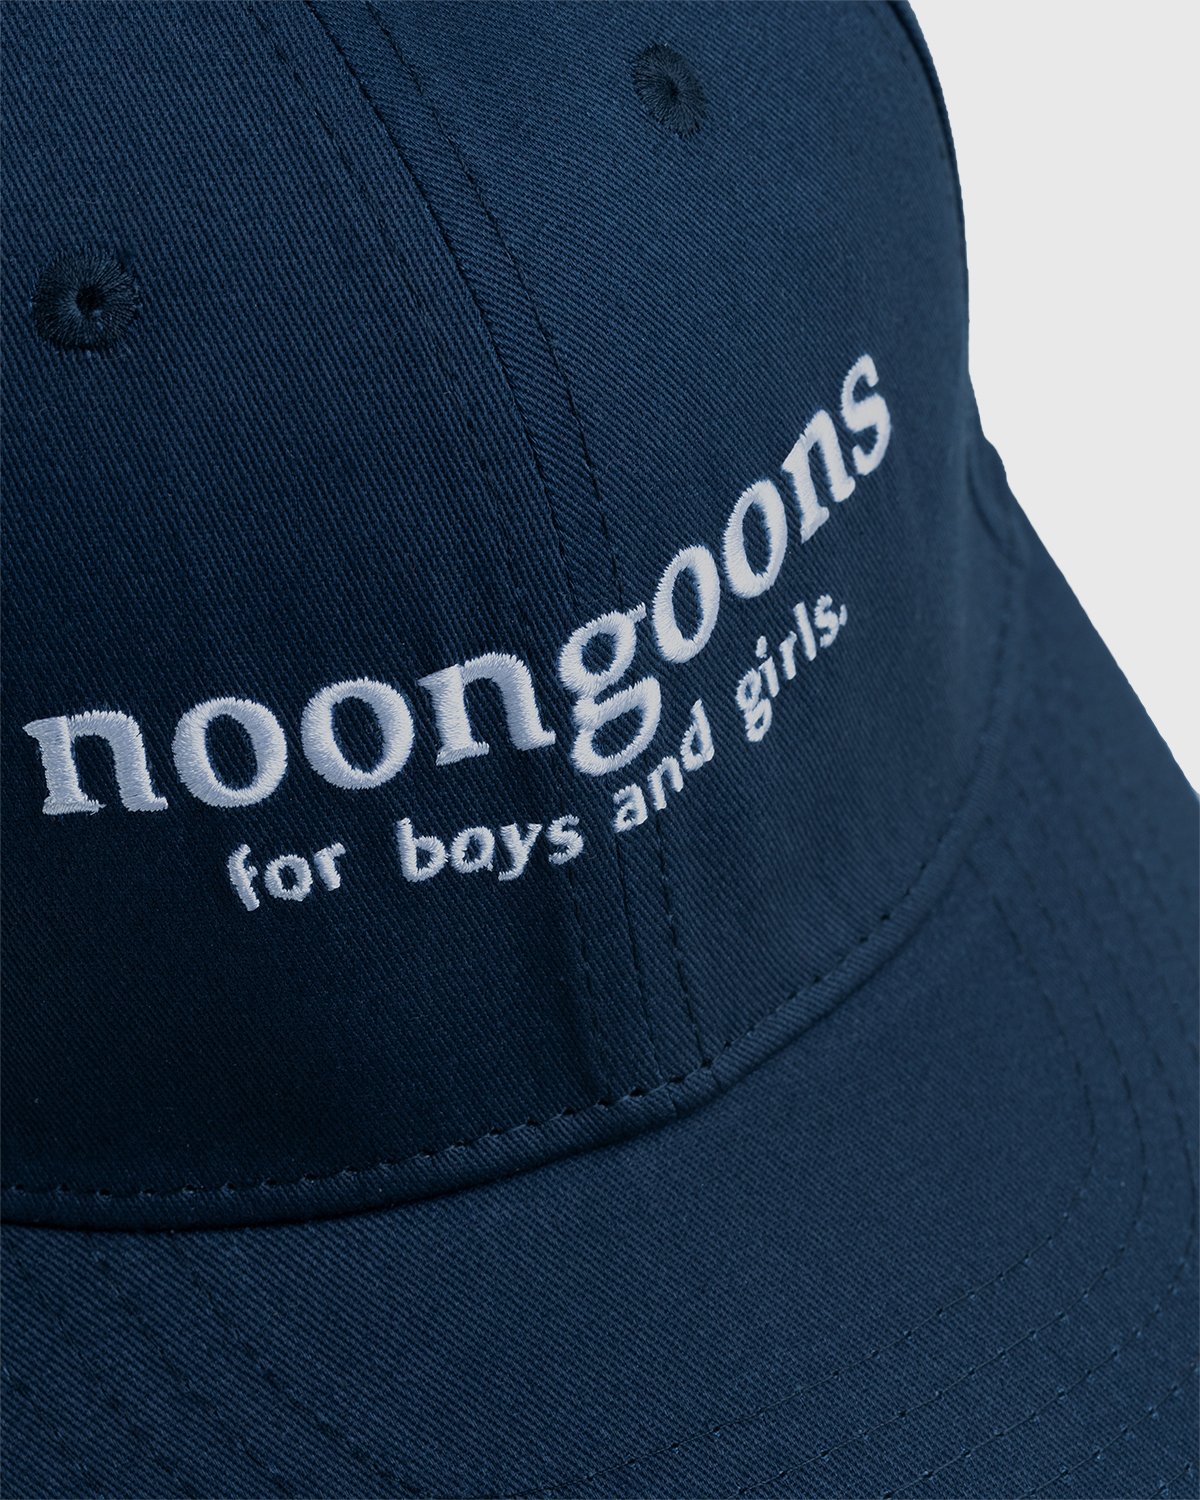 Noon Goons - Boys and Girls Hat Blue - Accessories - Blue - Image 6